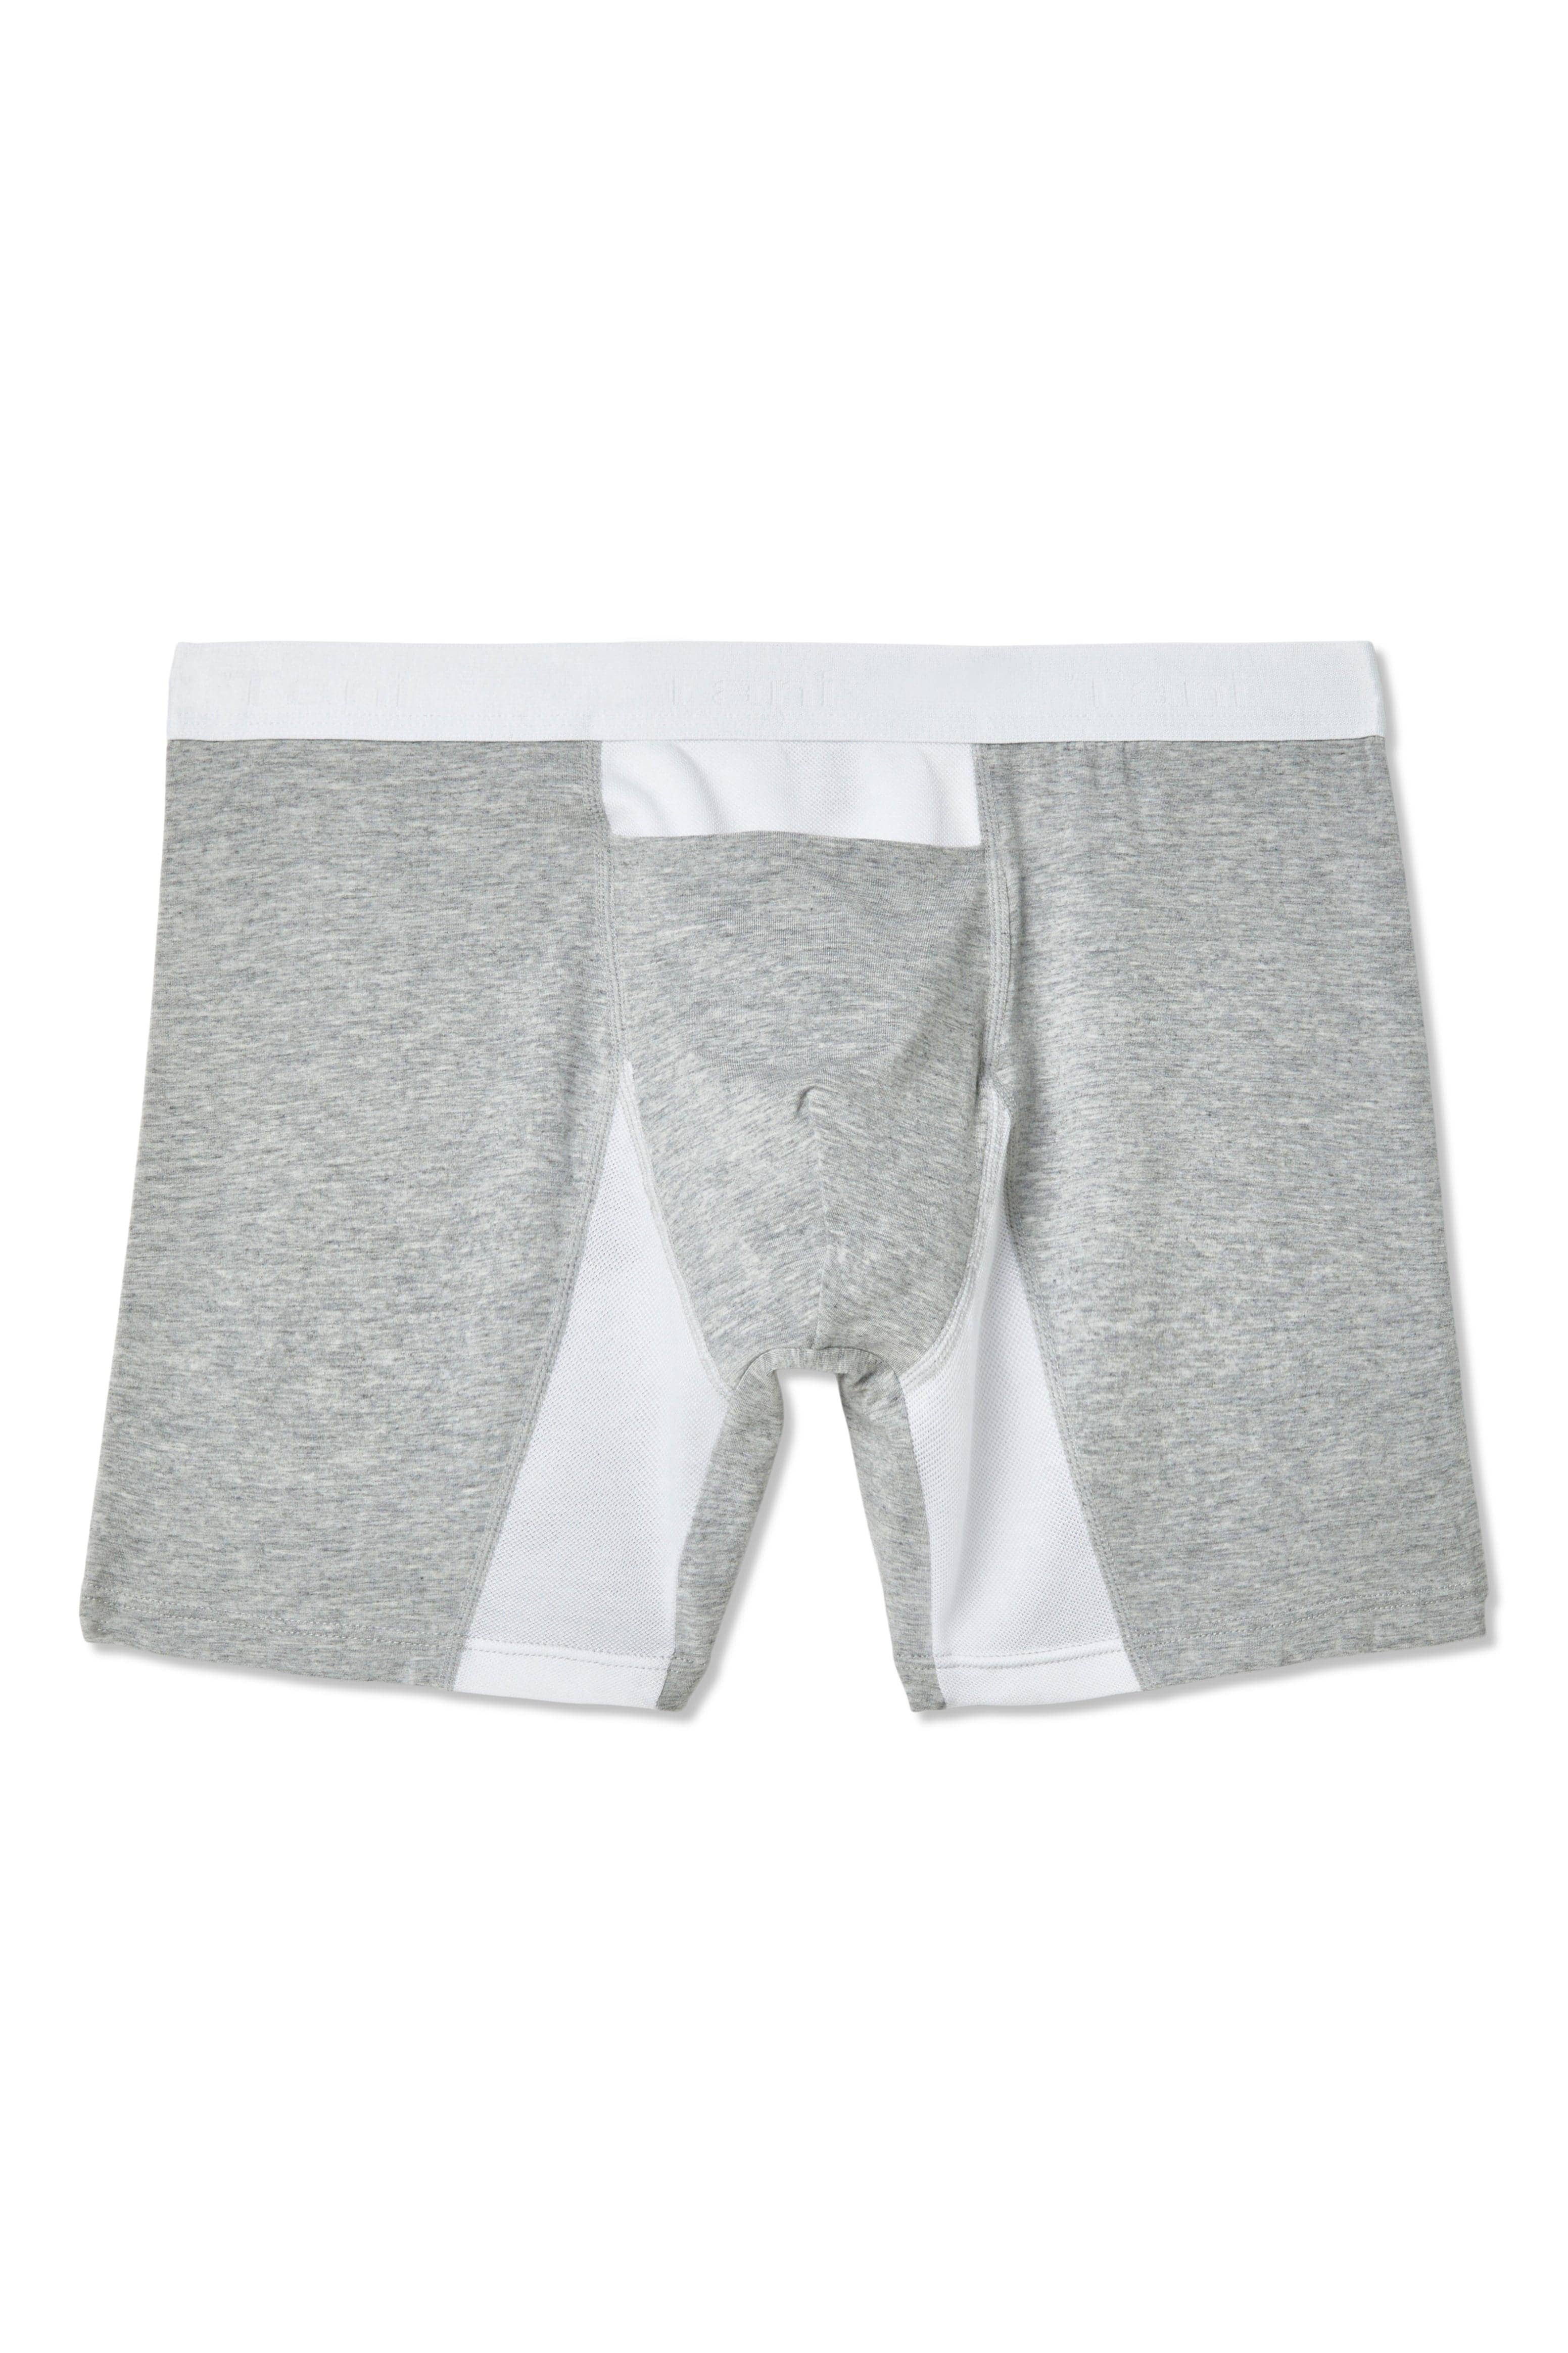 Experience Convenience: Pouch Boxer Briefs with Fly - Tani USA